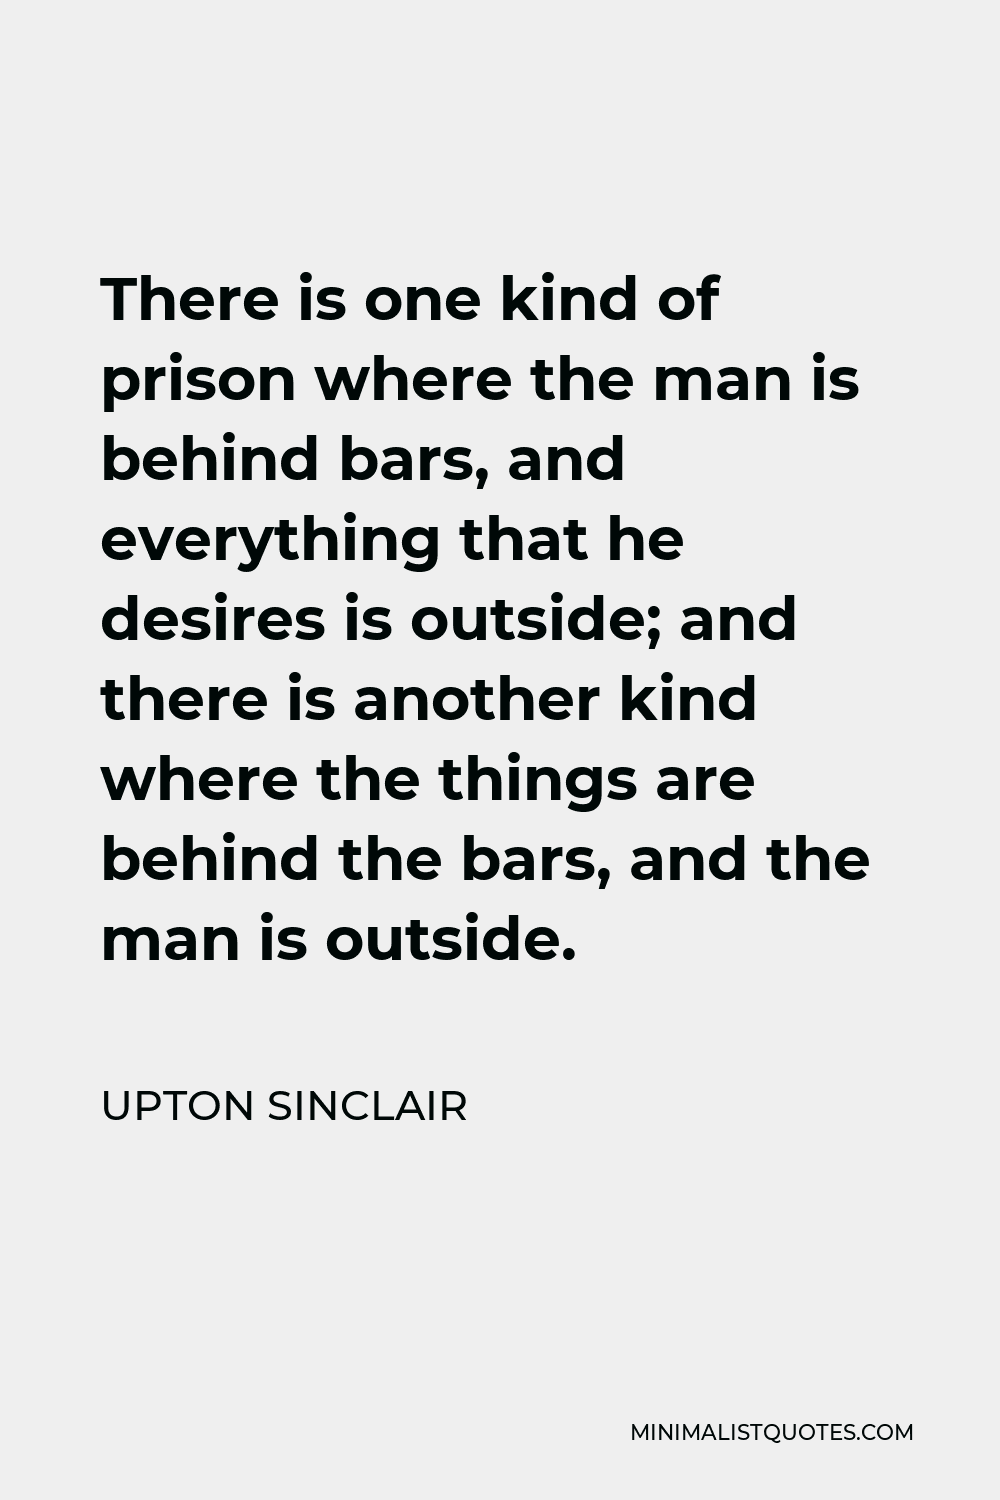 Upton Sinclair Quote - There is one kind of prison where the man is behind bars, and everything that he desires is outside; and there is another kind where the things are behind the bars, and the man is outside.